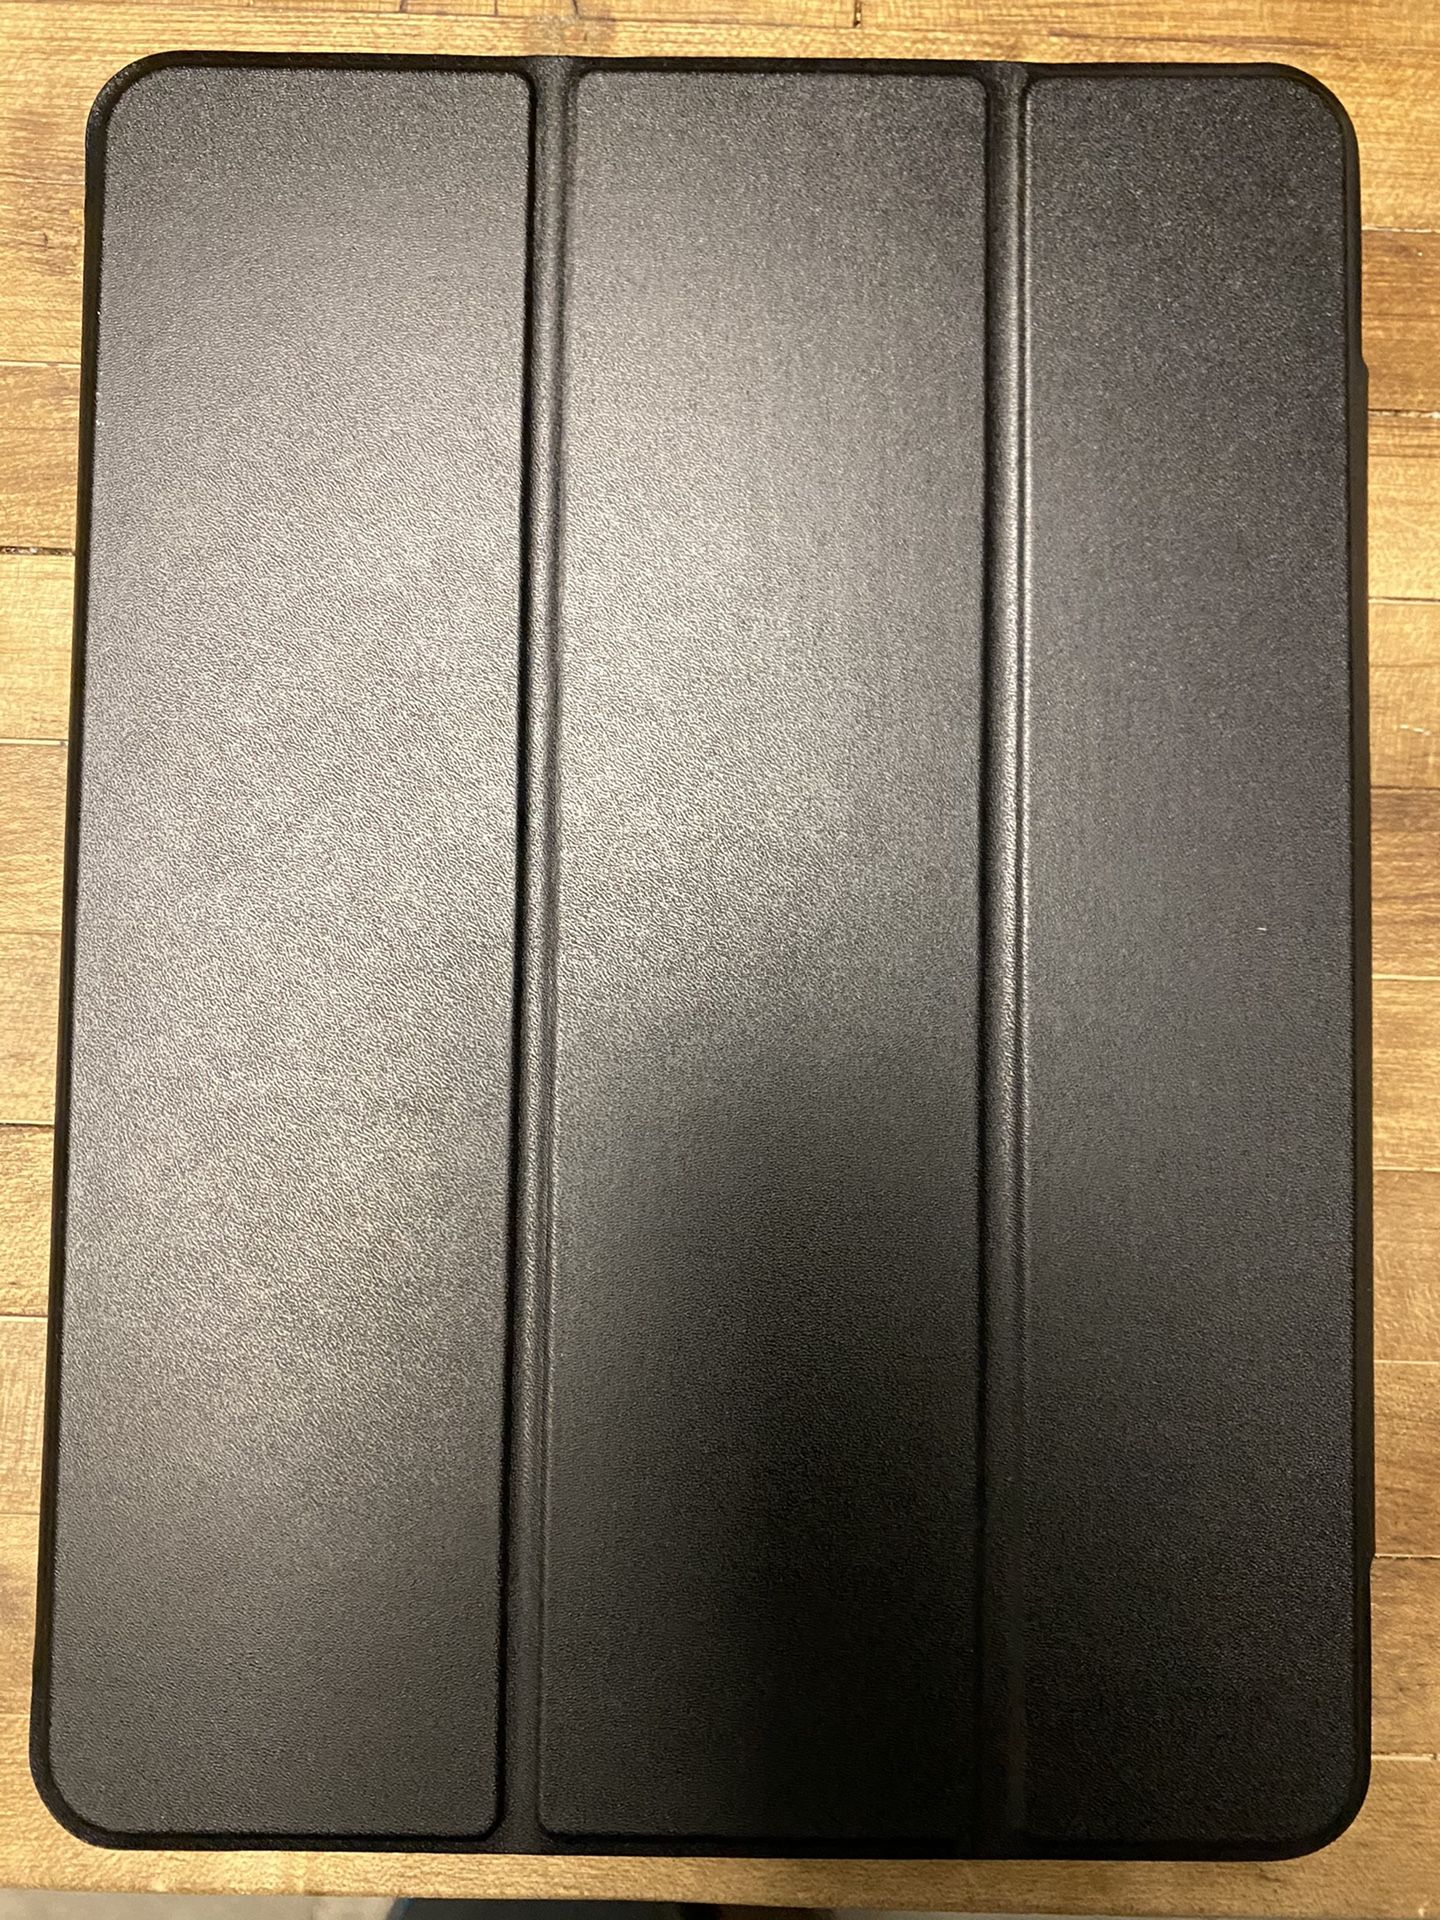 New IPad 11 pro case with screen cover